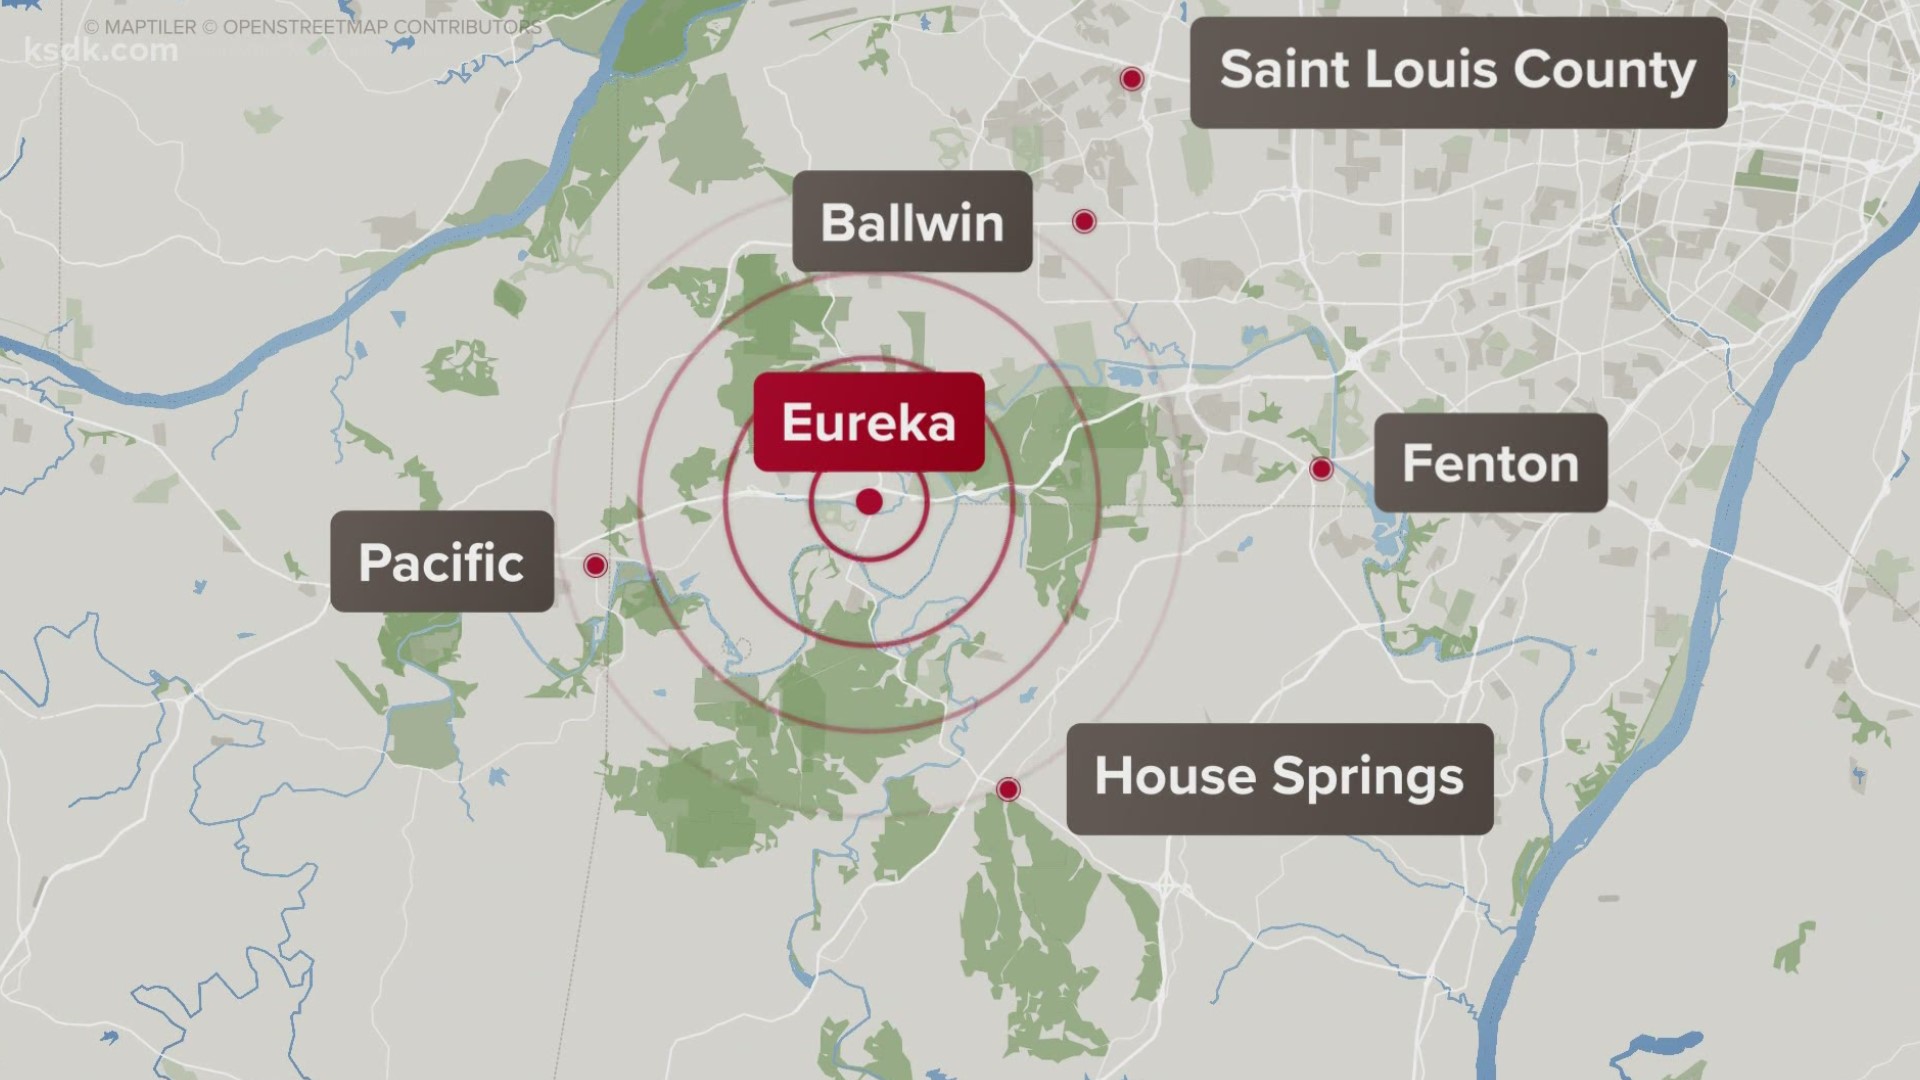 It was a 2.4-magnitude quake centered south of Interstate 44